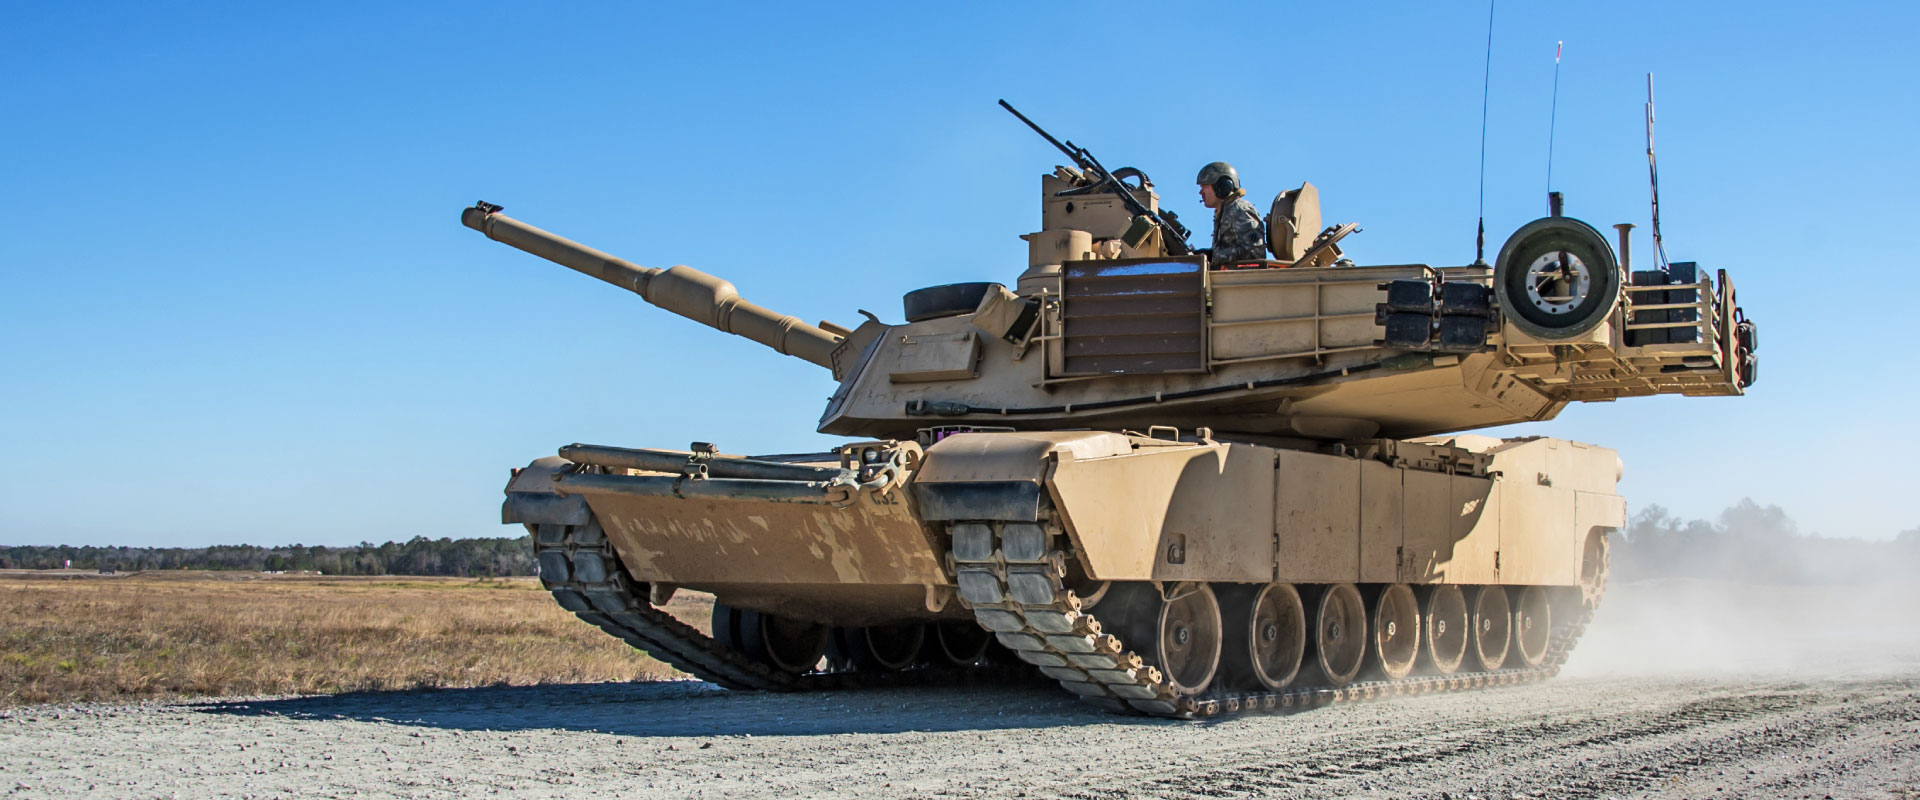 An image of a battle tank on the move.